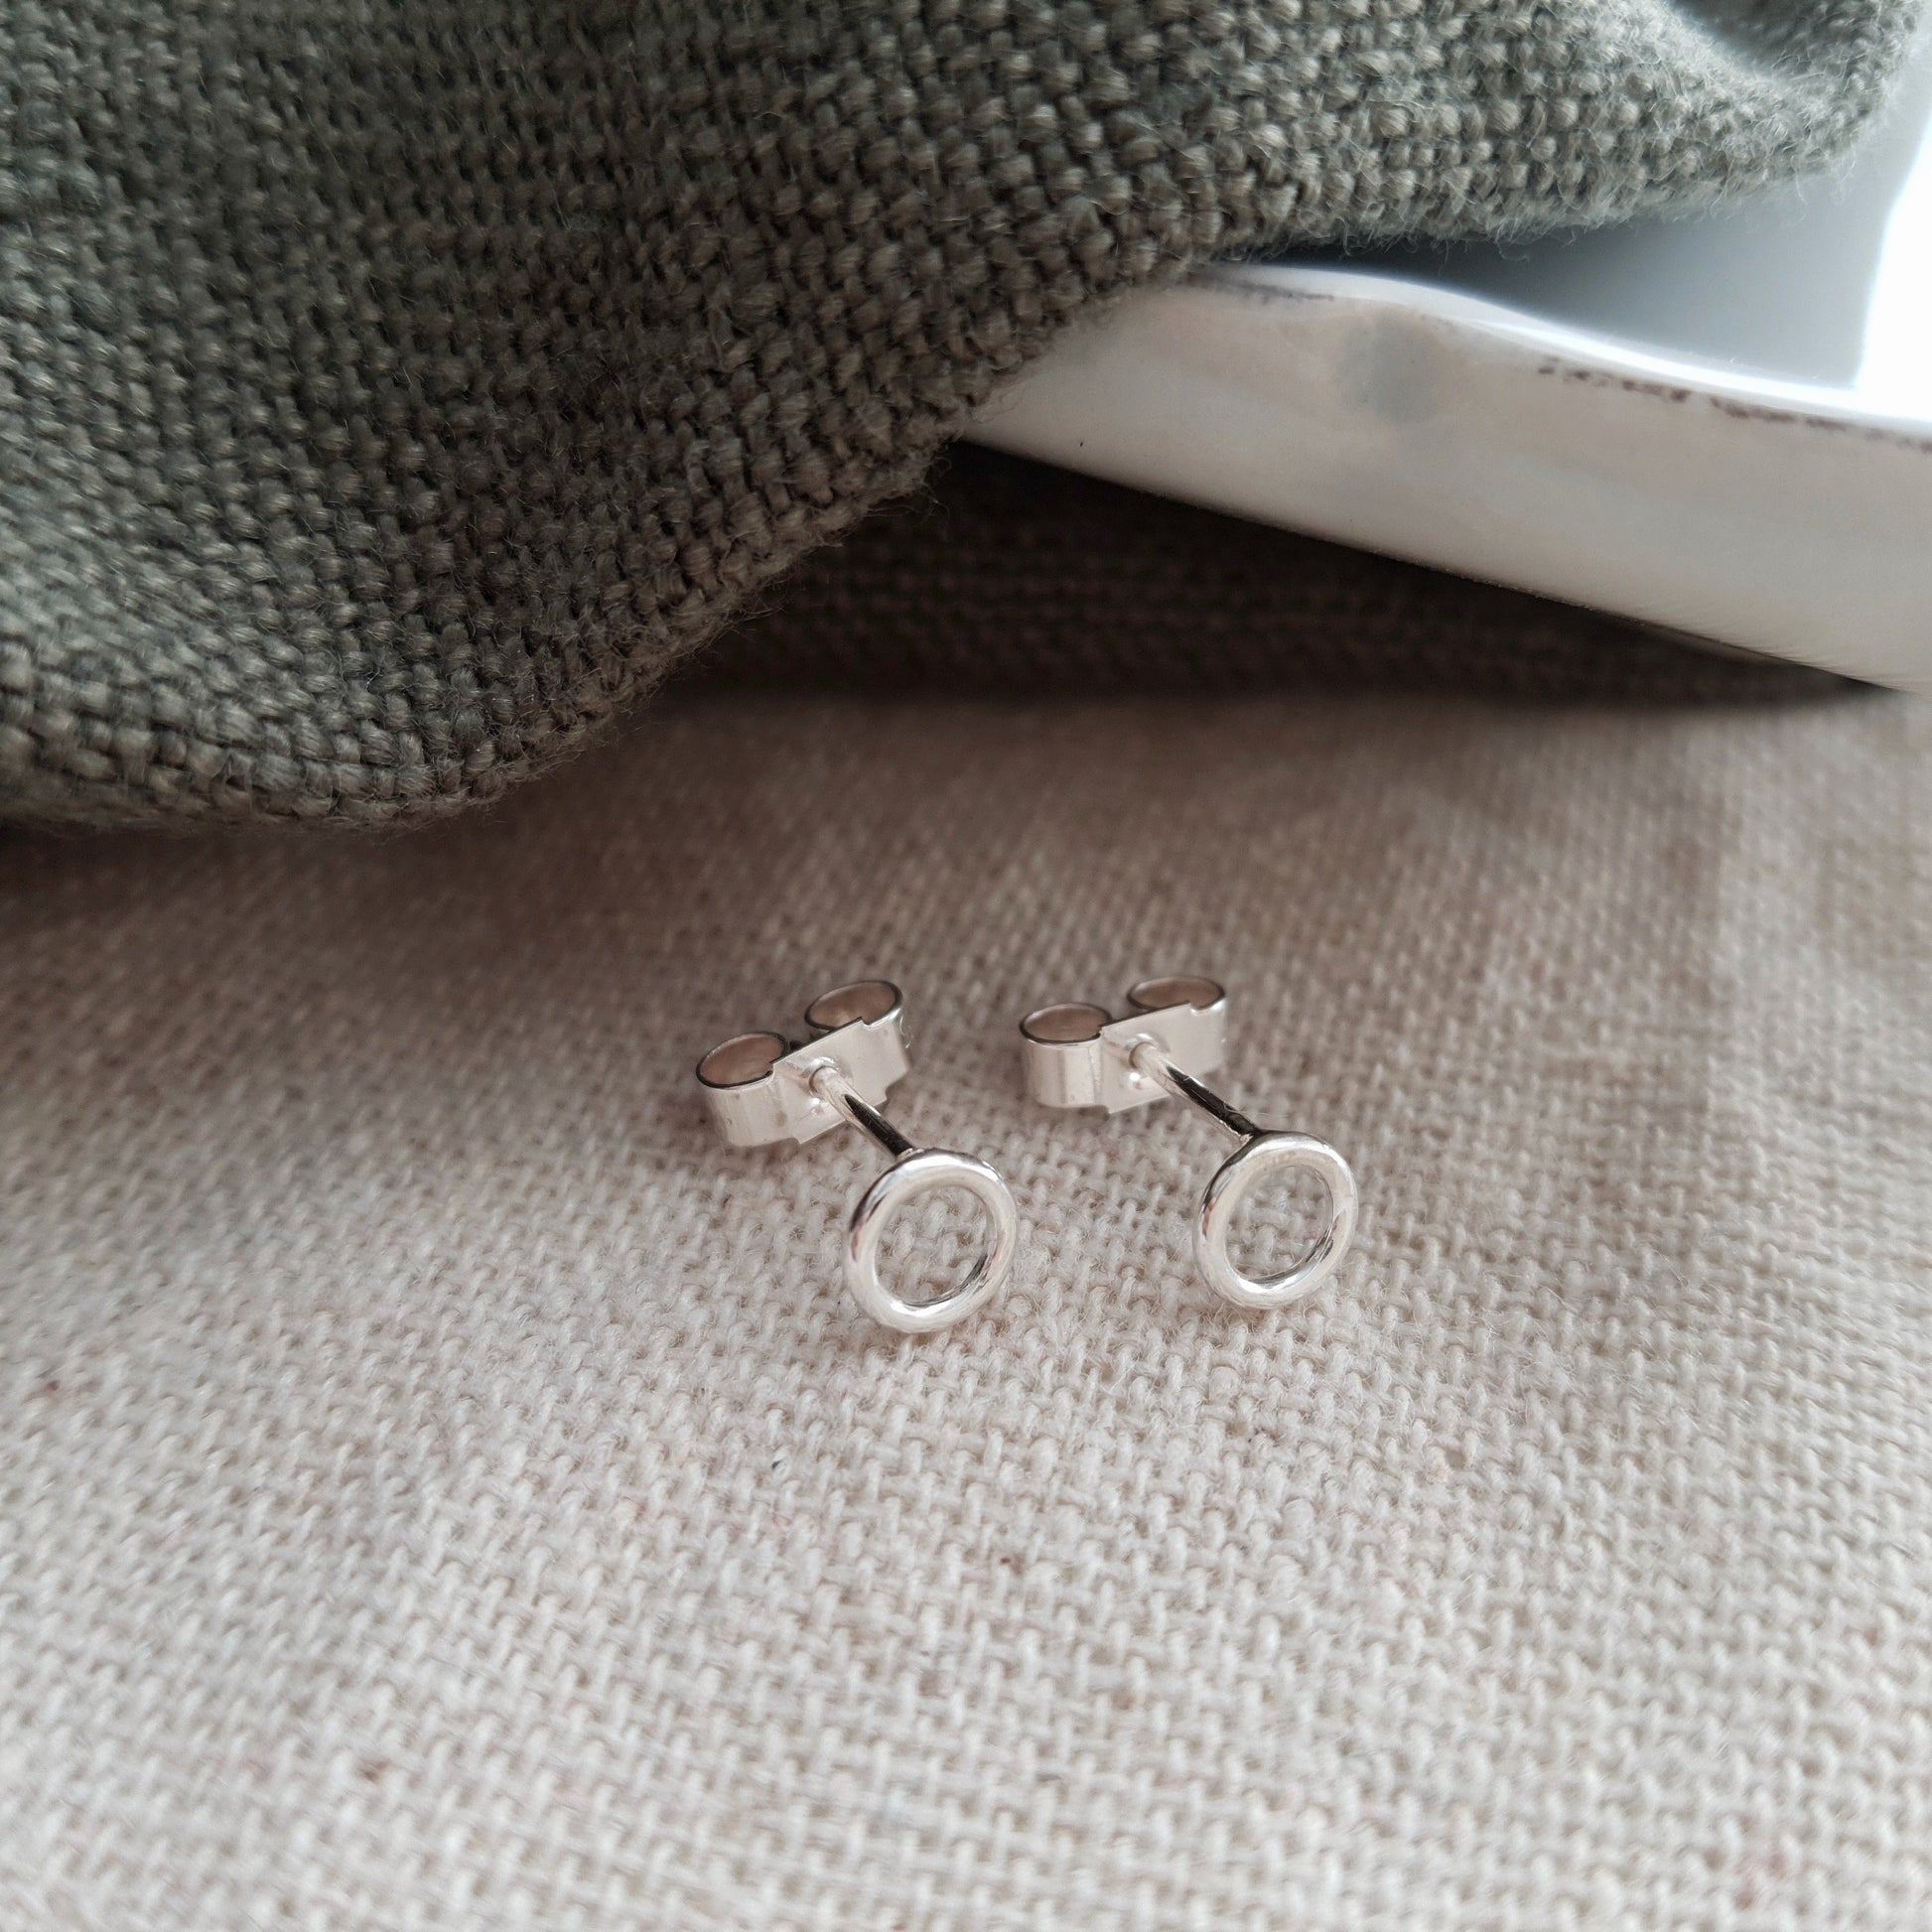 Small Silver Circle Studs Earrings handmade by Anna Calvert Jewellery in the UK